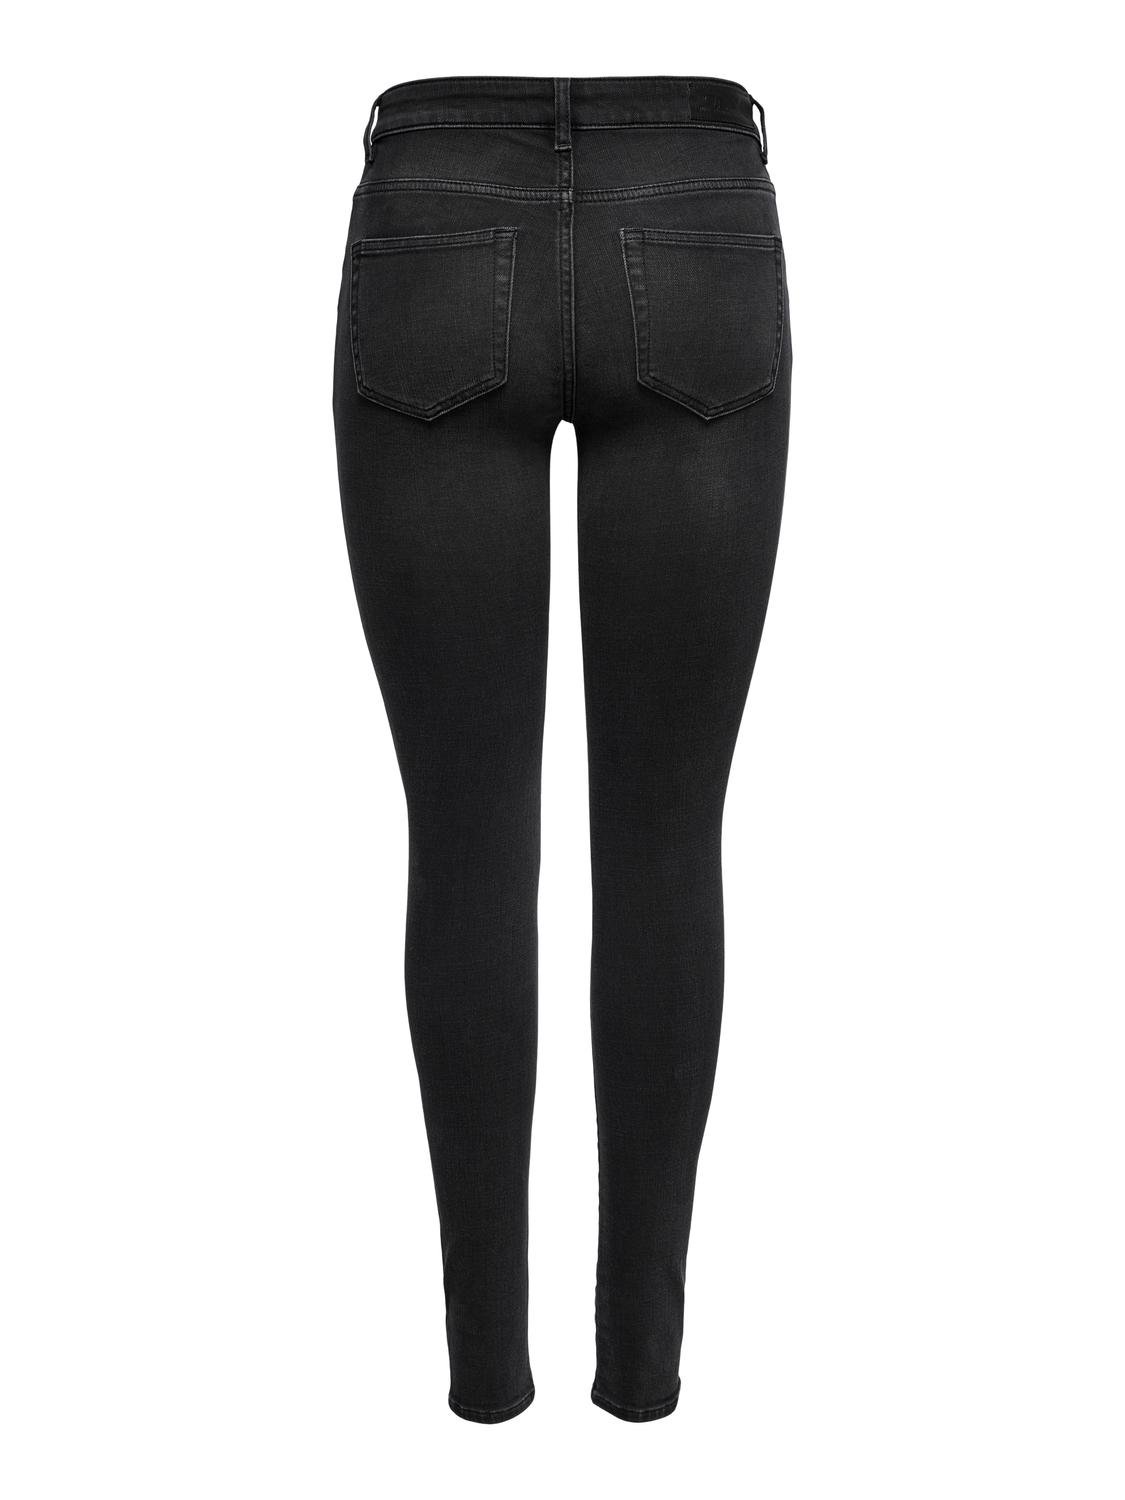 ONLY Skinny Fit Mid waist Jeans -Black - 15230042